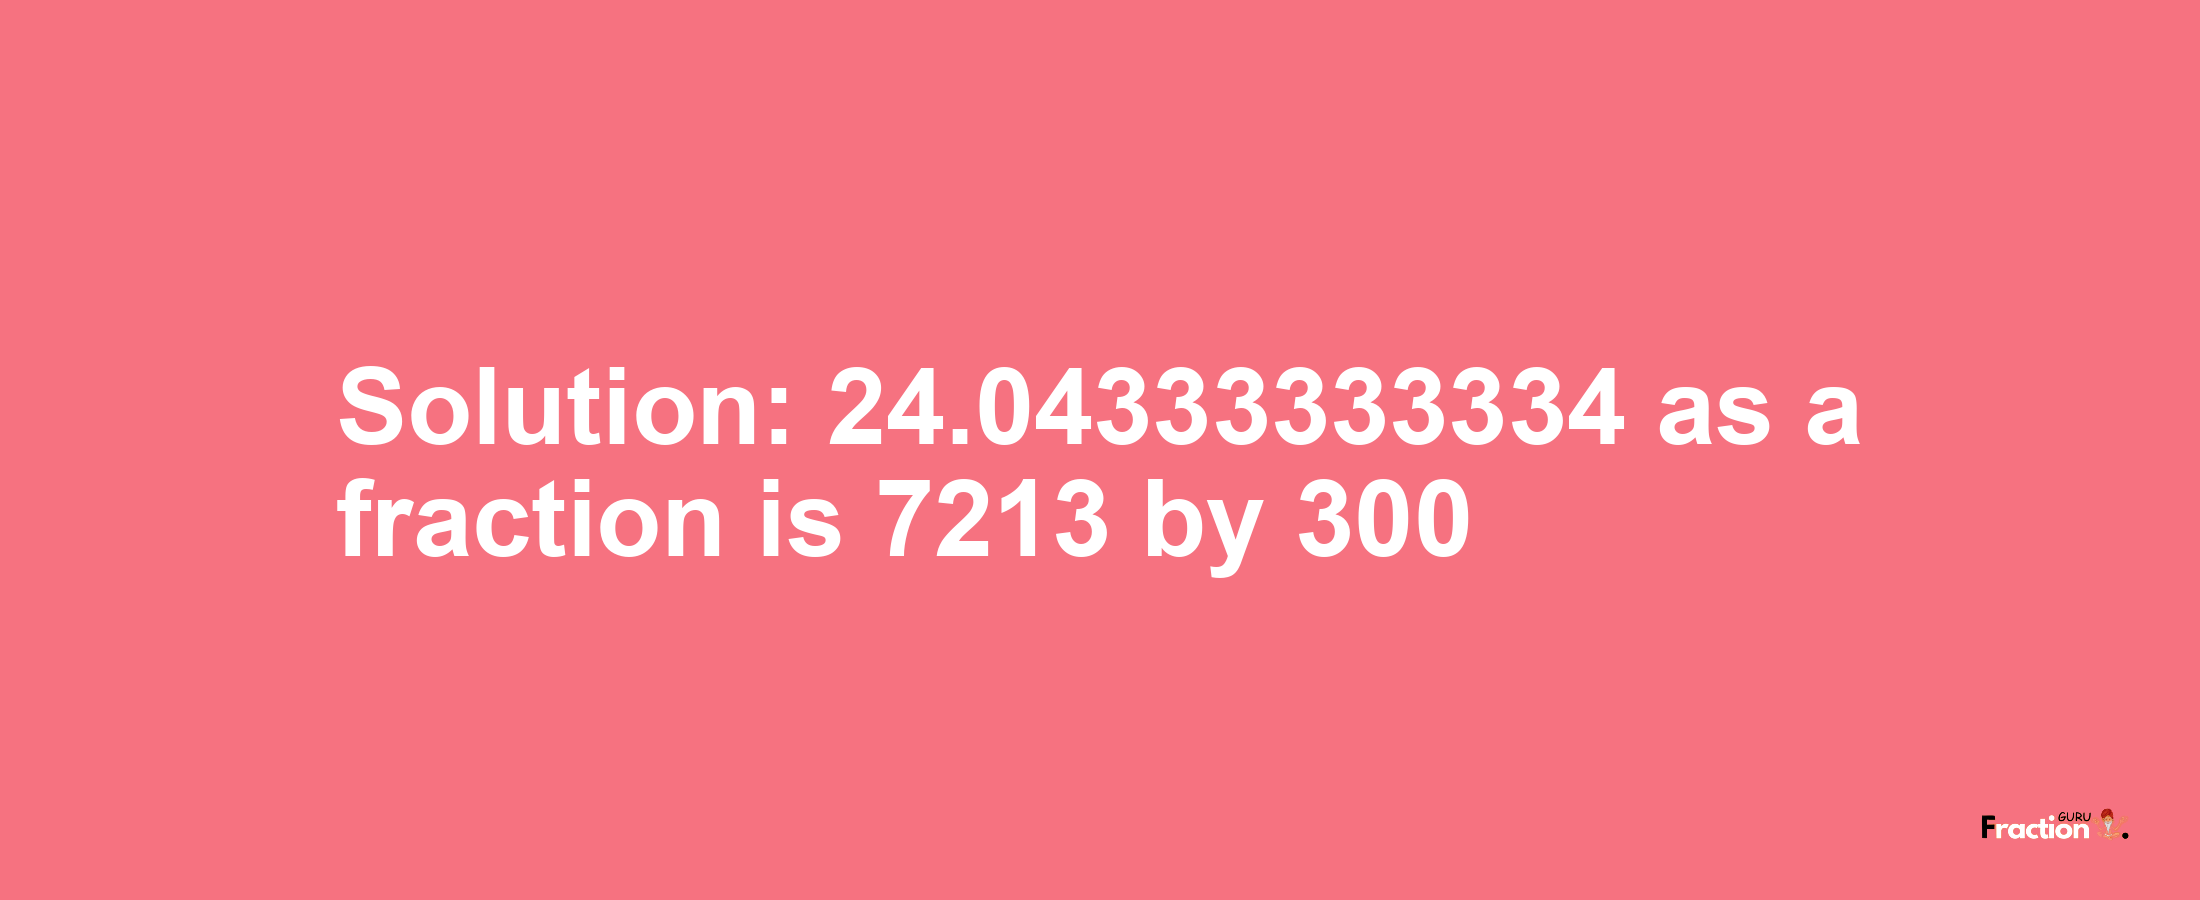 Solution:24.04333333334 as a fraction is 7213/300